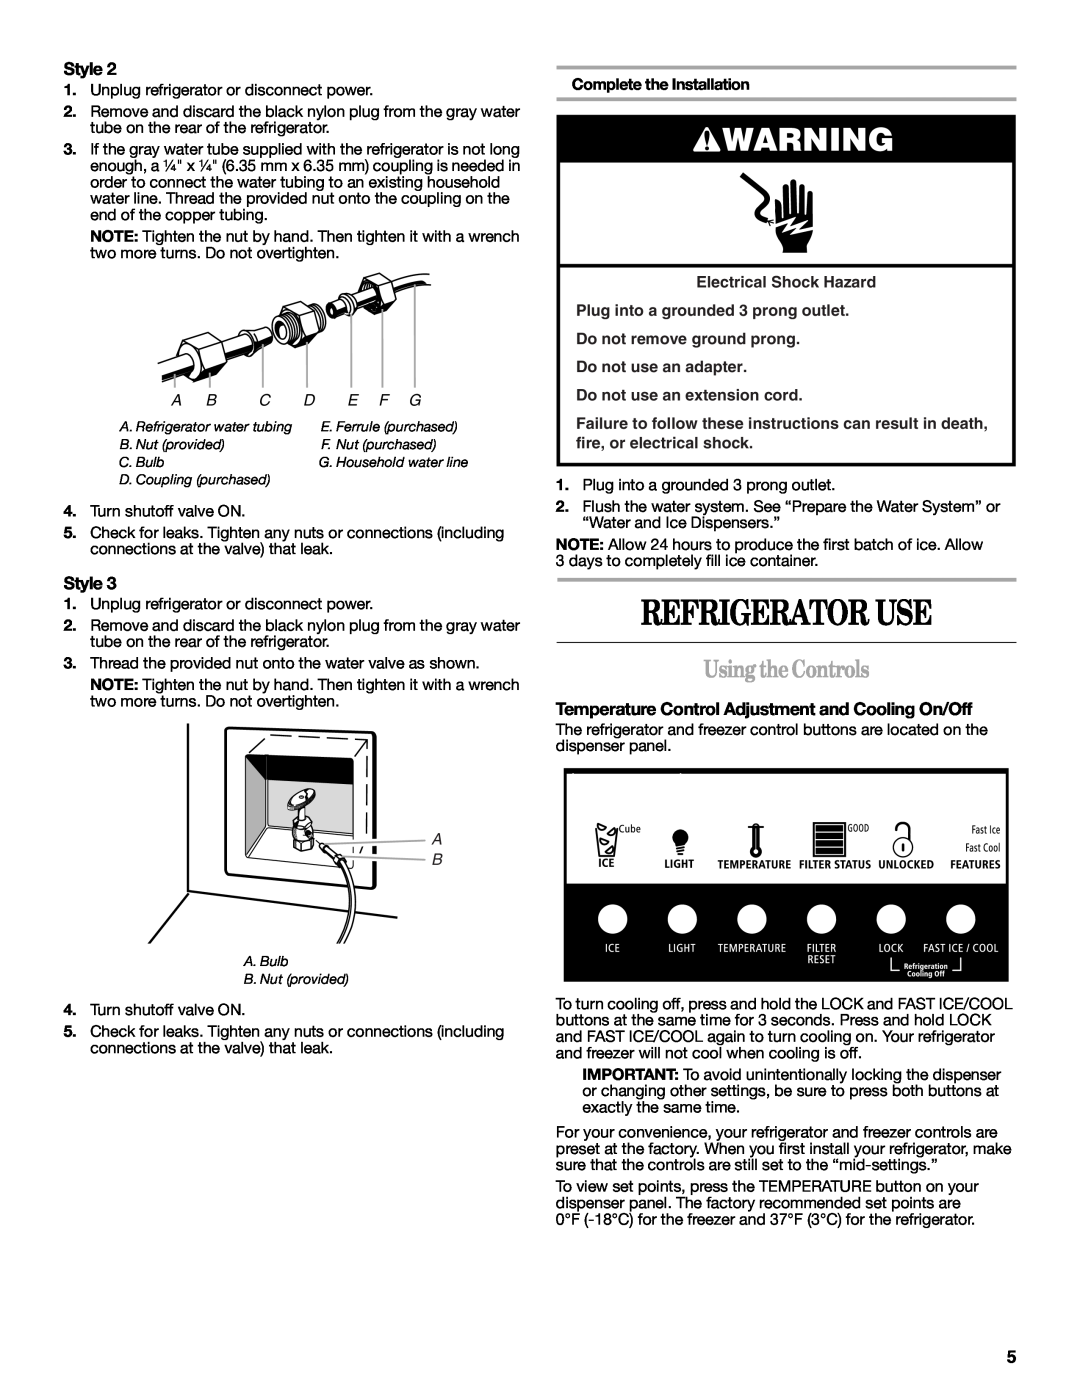 Whirlpool W10162458A Refrigerator Use, Using theControls, E F G, Complete the Installation, Electrical Shock Hazard 